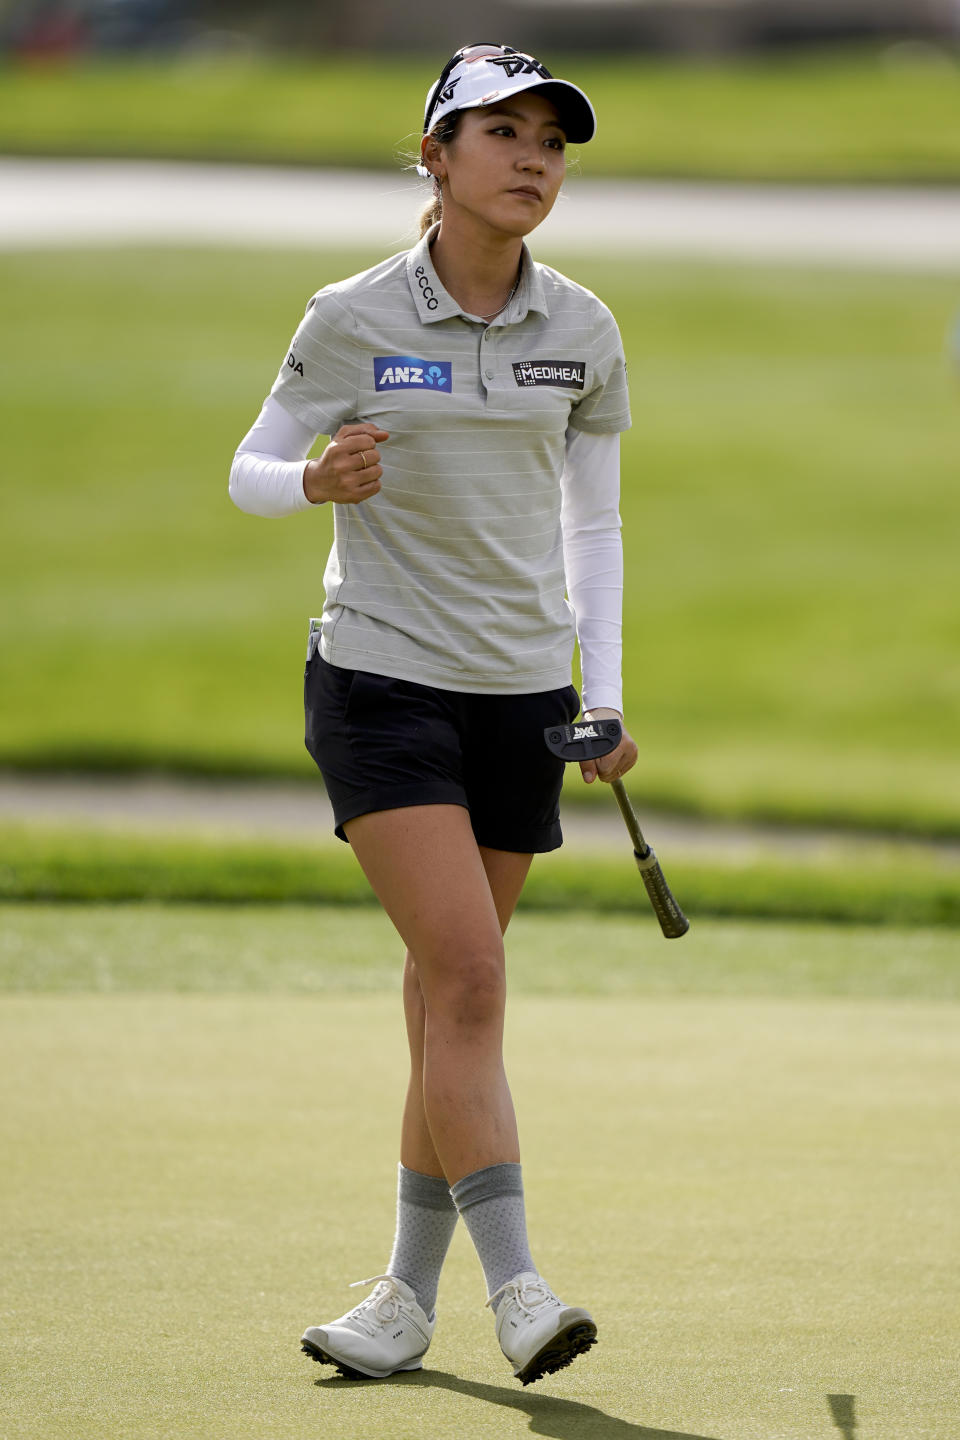 Lydia Ko reacts after making an eagle on the second hole during the second round of the LPGA Tour ANA Inspiration golf tournament at Mission Hills Country Club on Friday, April 5, 2019, in Rancho Mirage, Calif. (AP Photo/Chris Carlson)